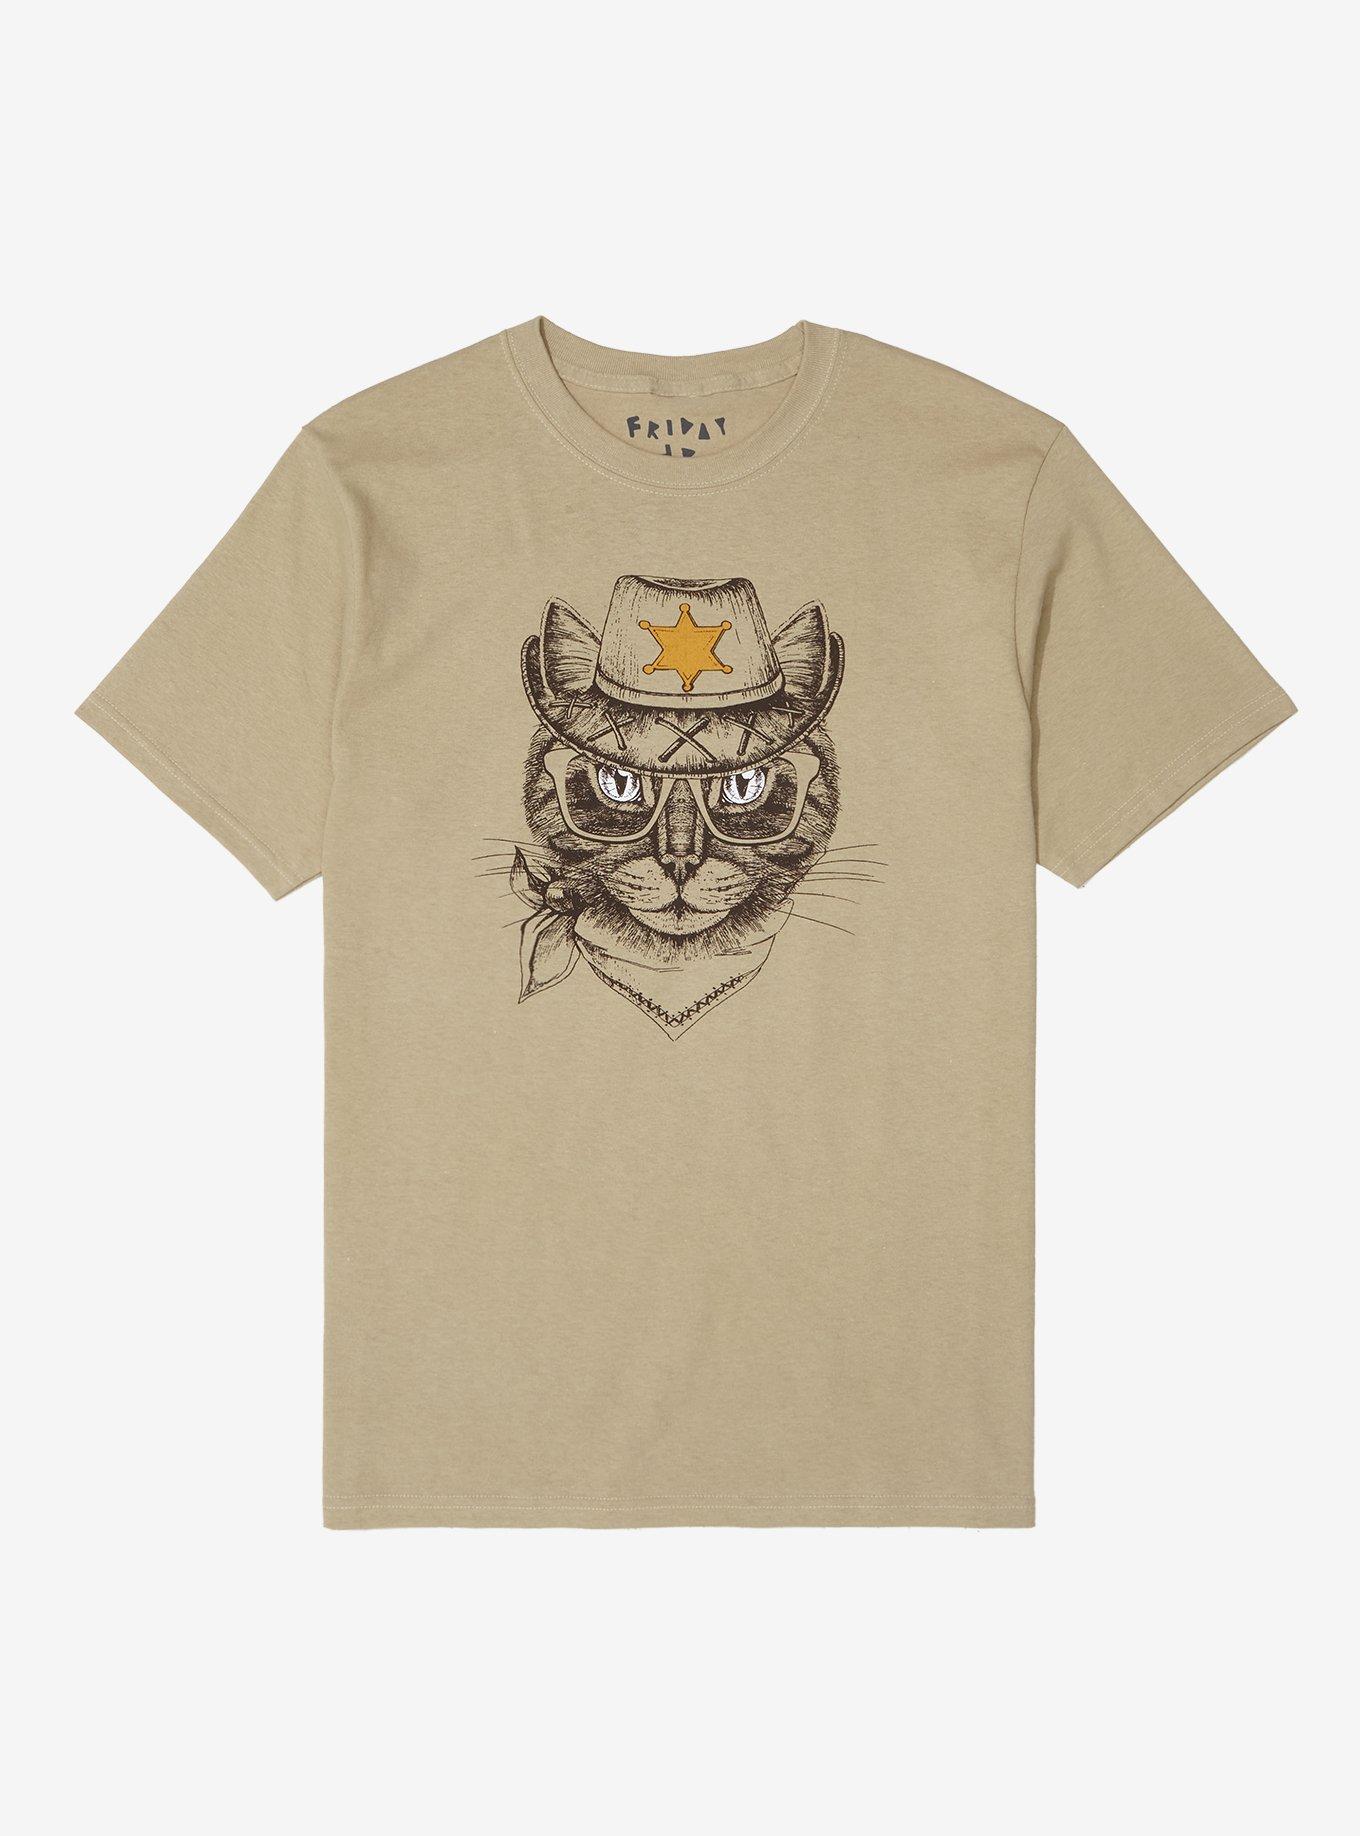 Sheriff Cat T-Shirt By Friday Jr, SAND, hi-res